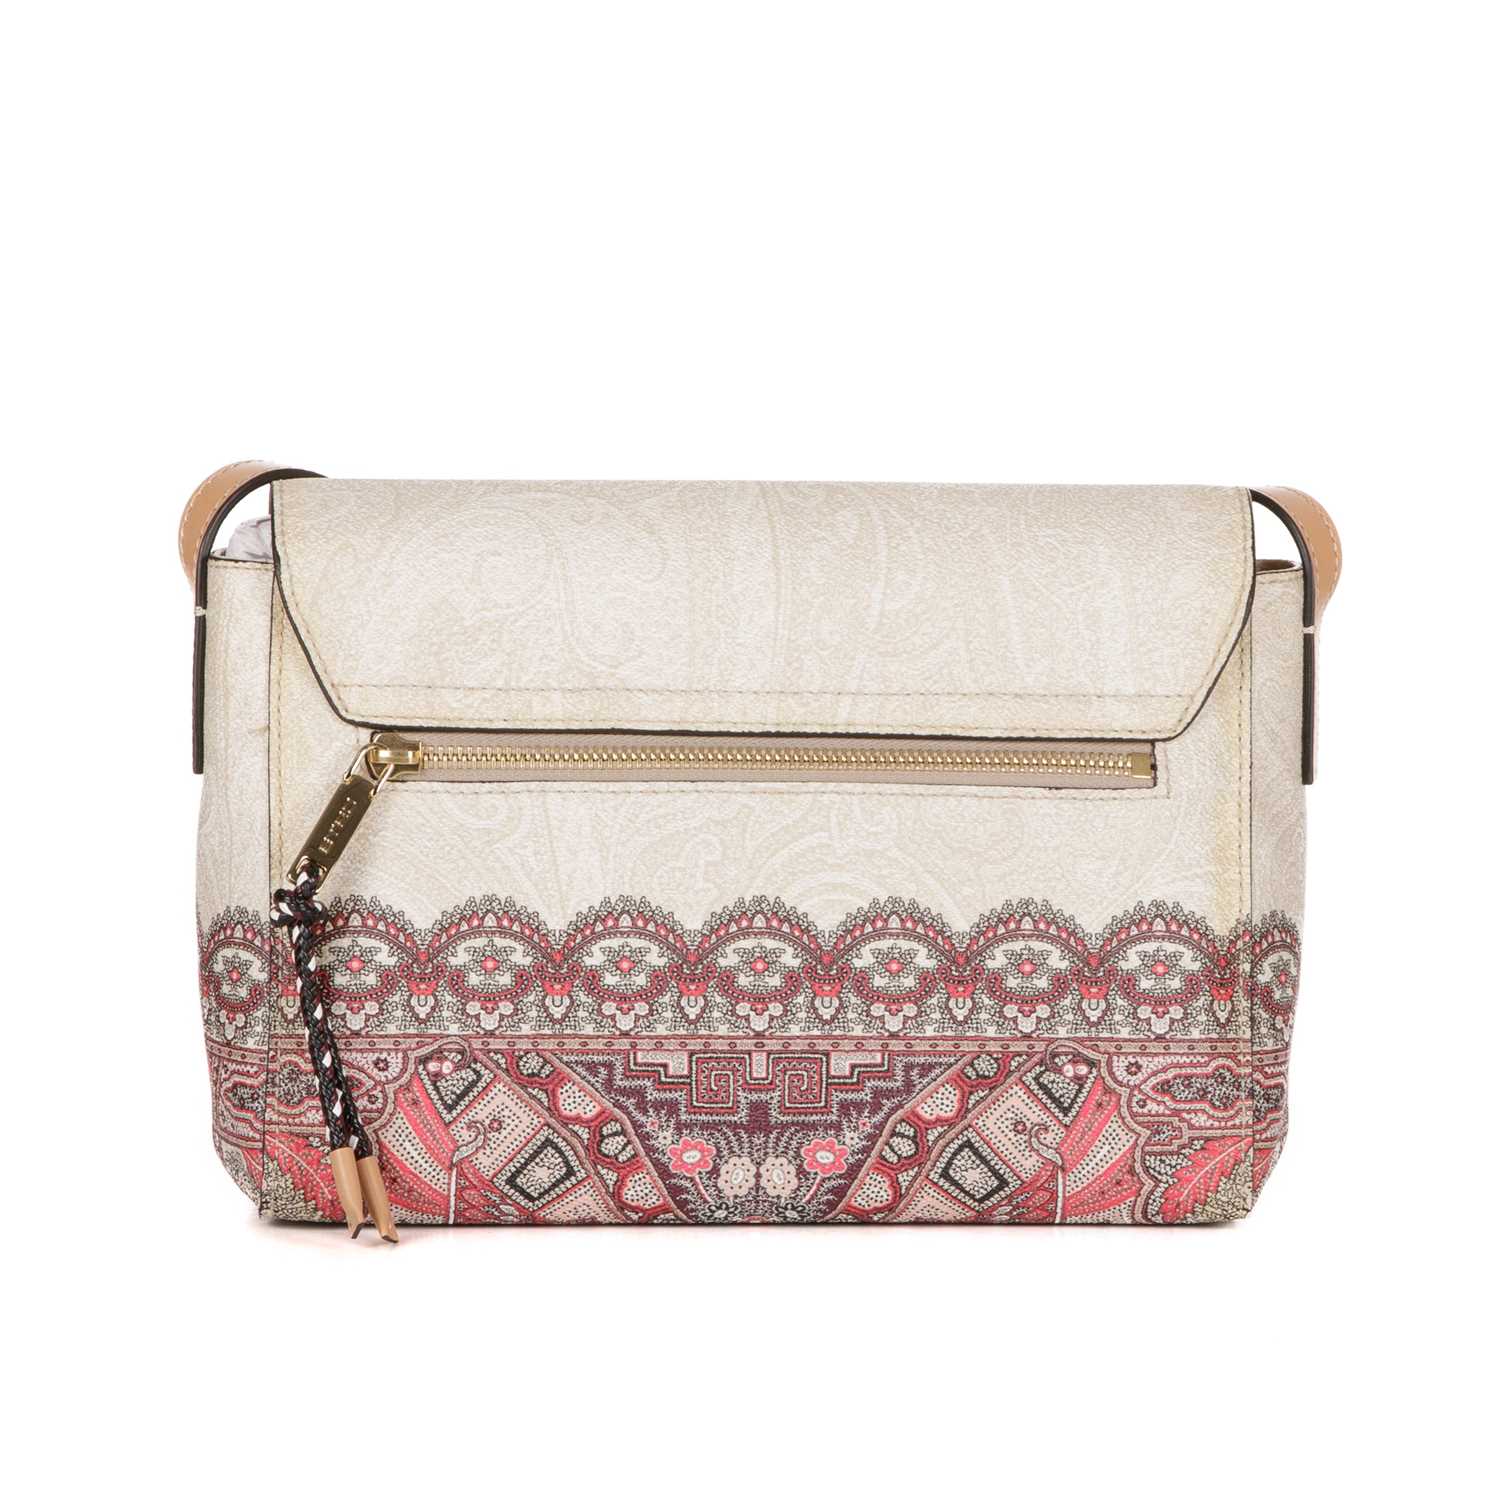 Etro, a coated canvas crossbody handbag, featuring a subtle paisley pattern to the cream exterior - Image 2 of 6